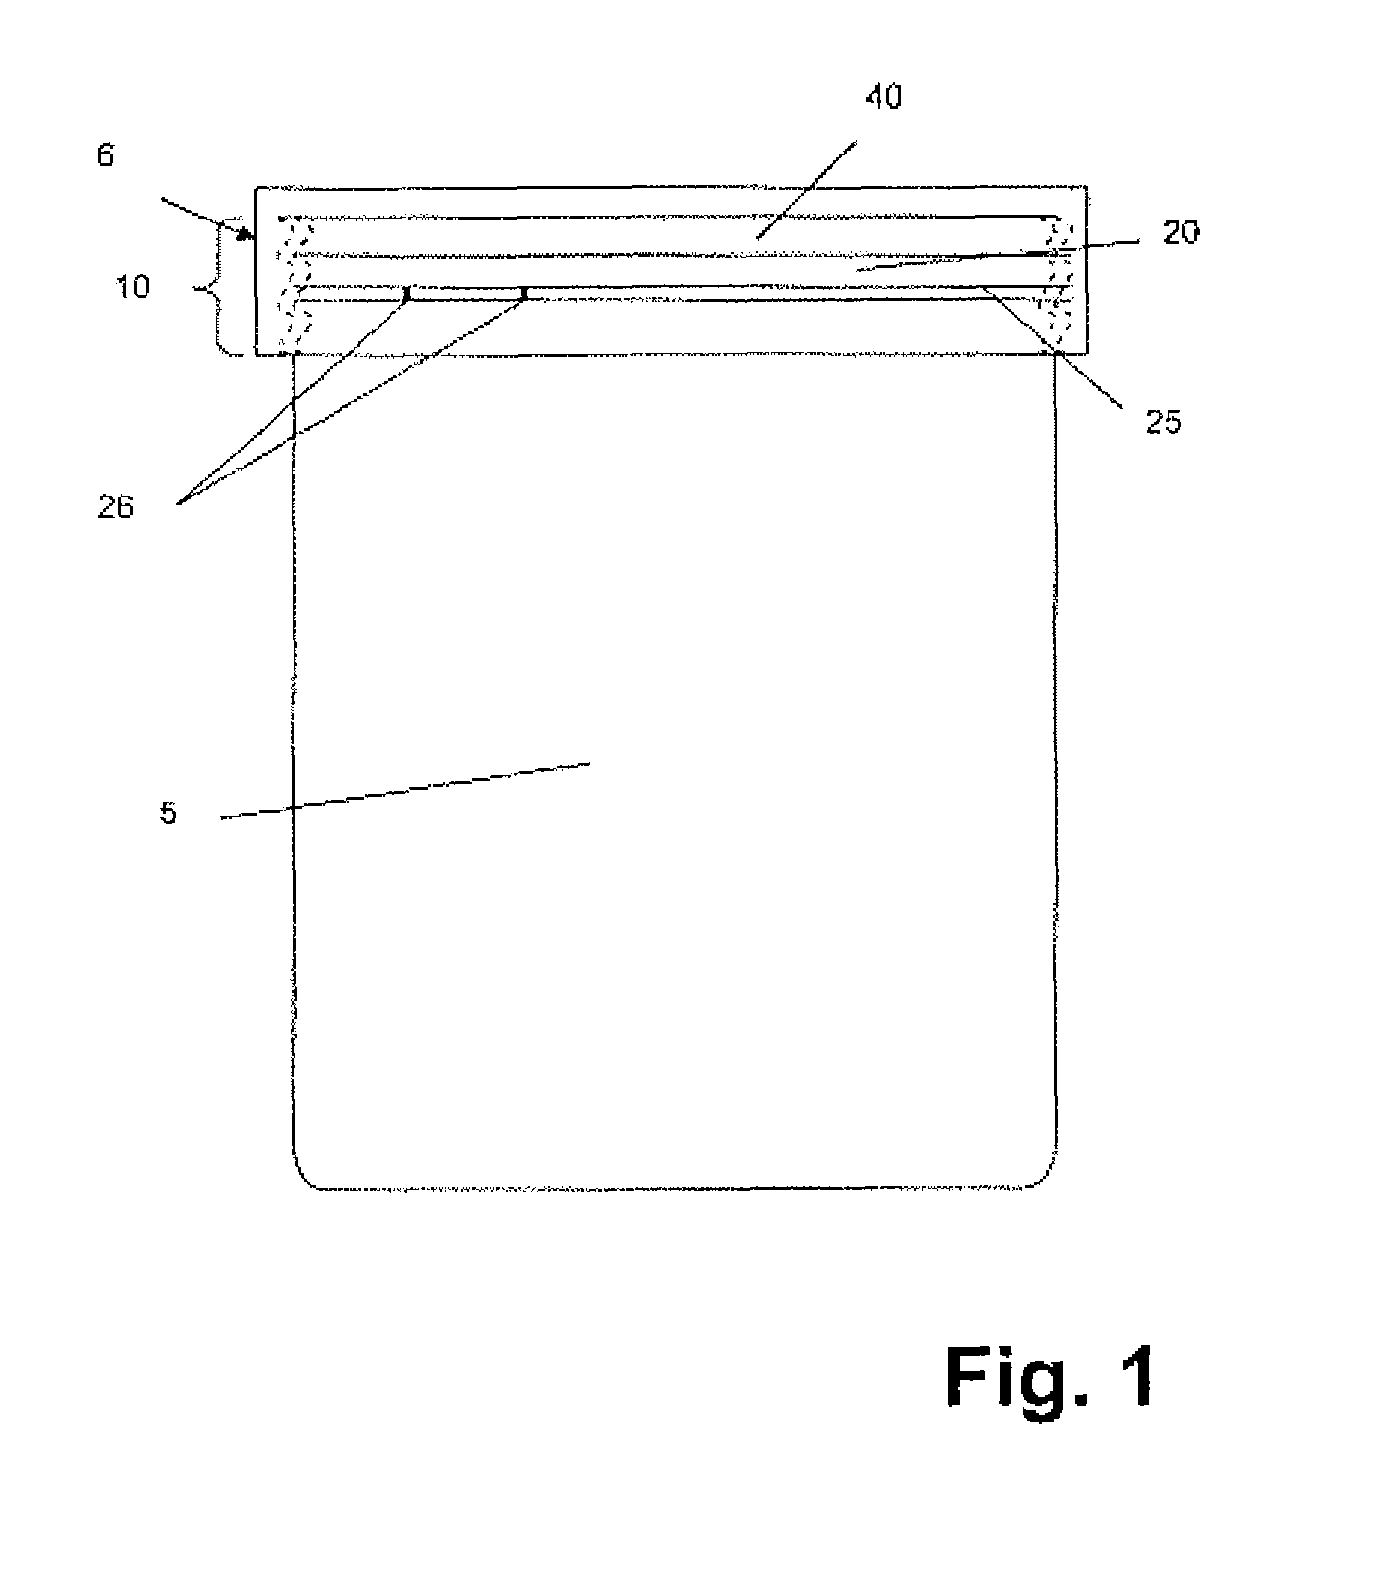 Sealing disk for induction sealing a container